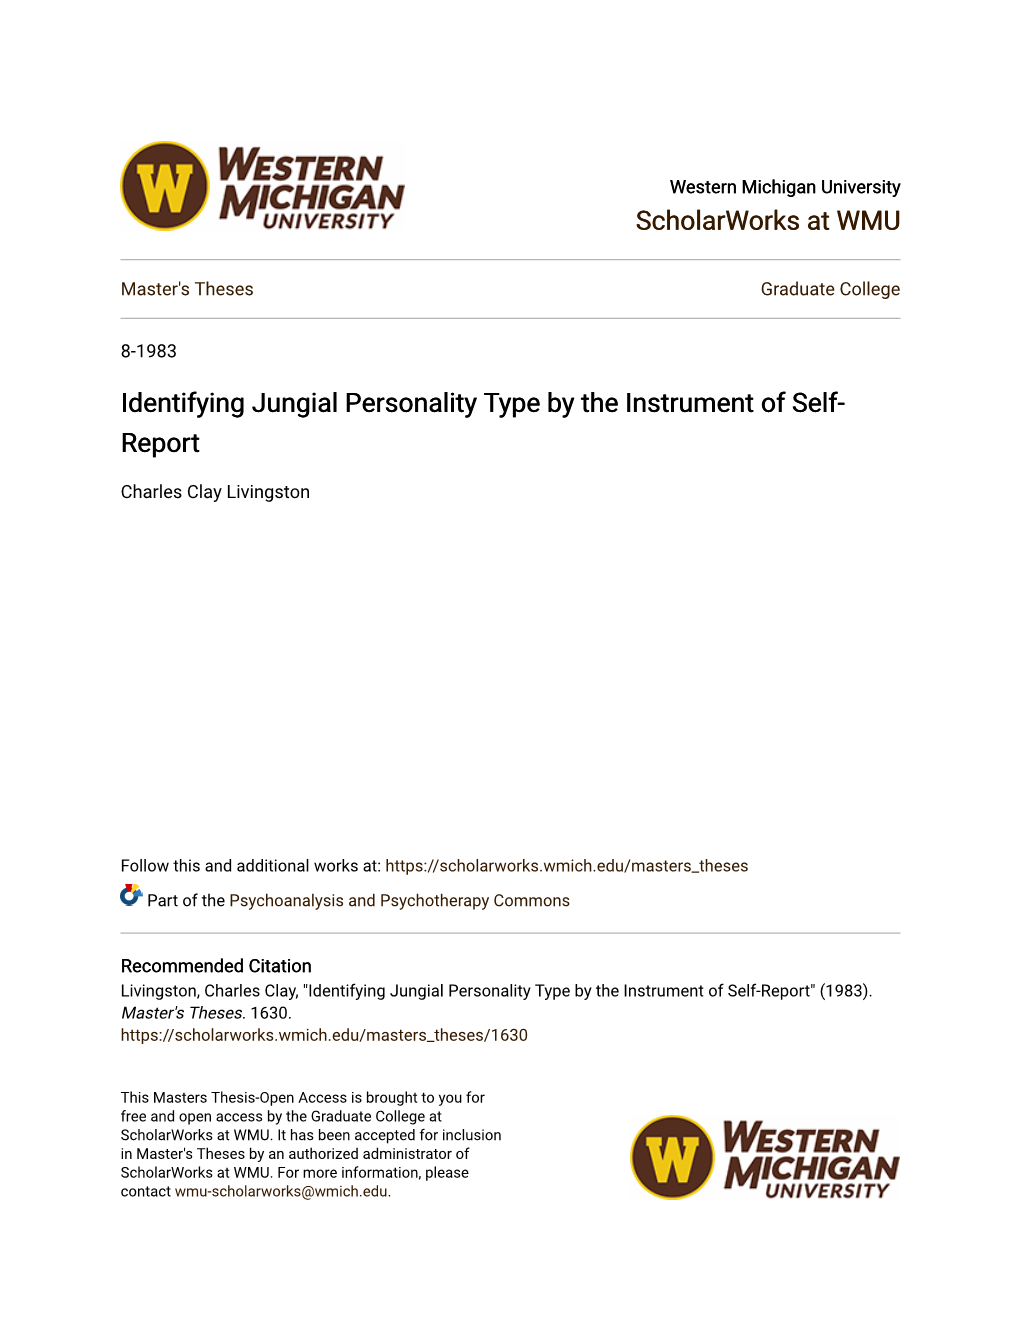 Identifying Jungial Personality Type by the Instrument of Self-Report" (1983)